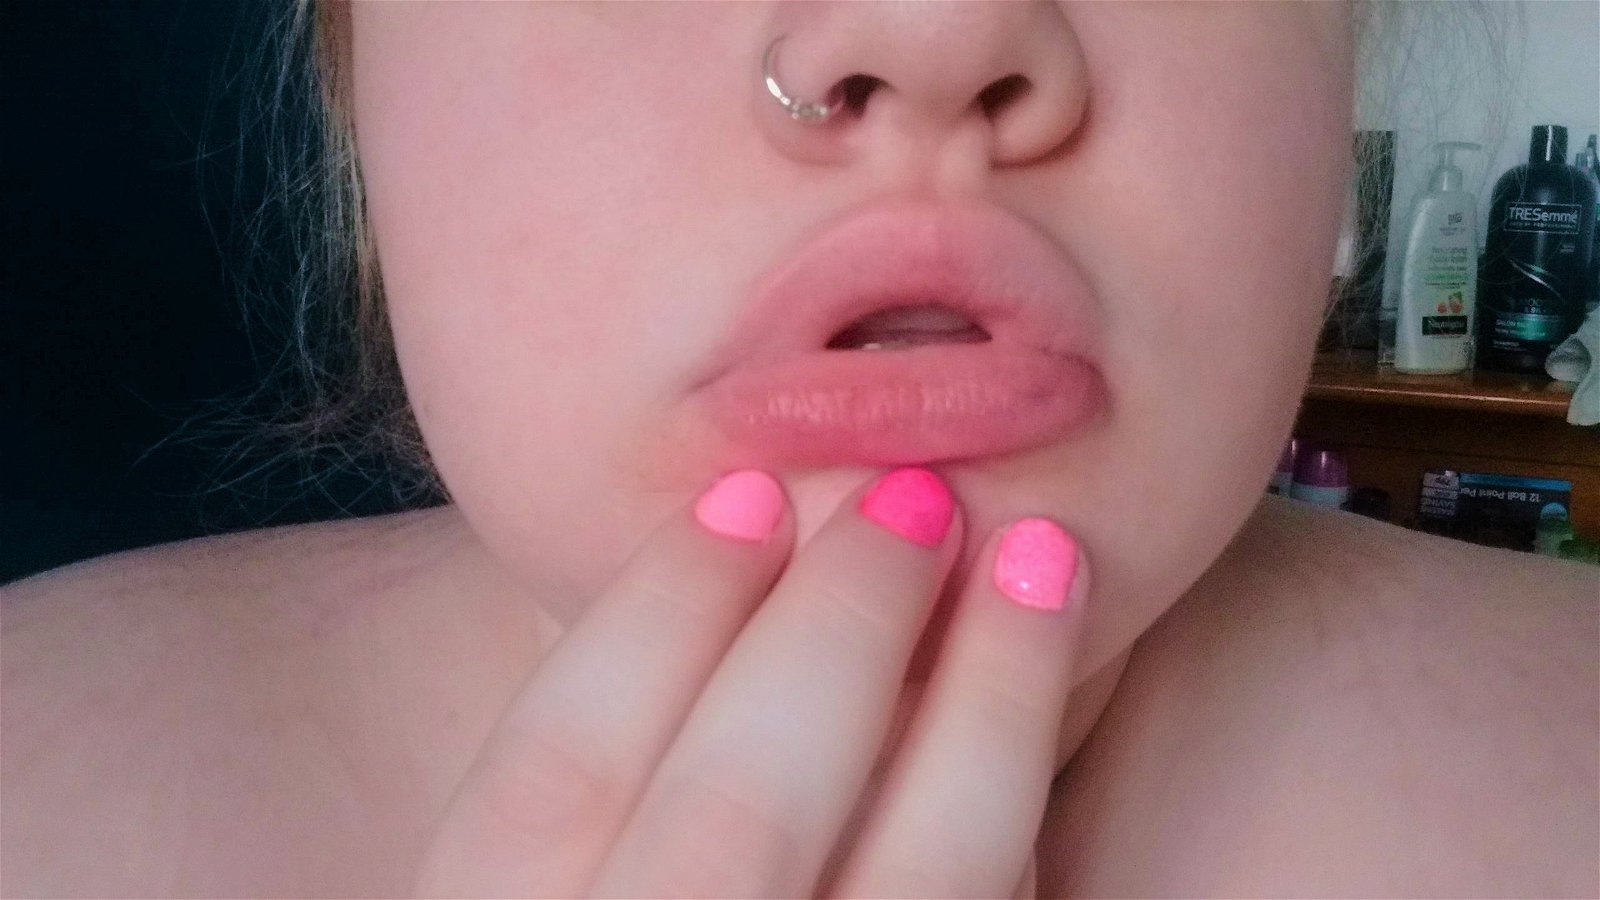 Watch the Photo by MadameEllie with the username @MadameEllie, who is a star user, posted on July 19, 2019. The post is about the topic Findom. and the text says 'SUB POSITIONS OPEN

These juicy lips are all you can think about... Imagine them curling into a wicked smile when you send. Amazon GCs from the .uk site, now. Don't keep me waiting 😈
madameelliehere@gmail.com'